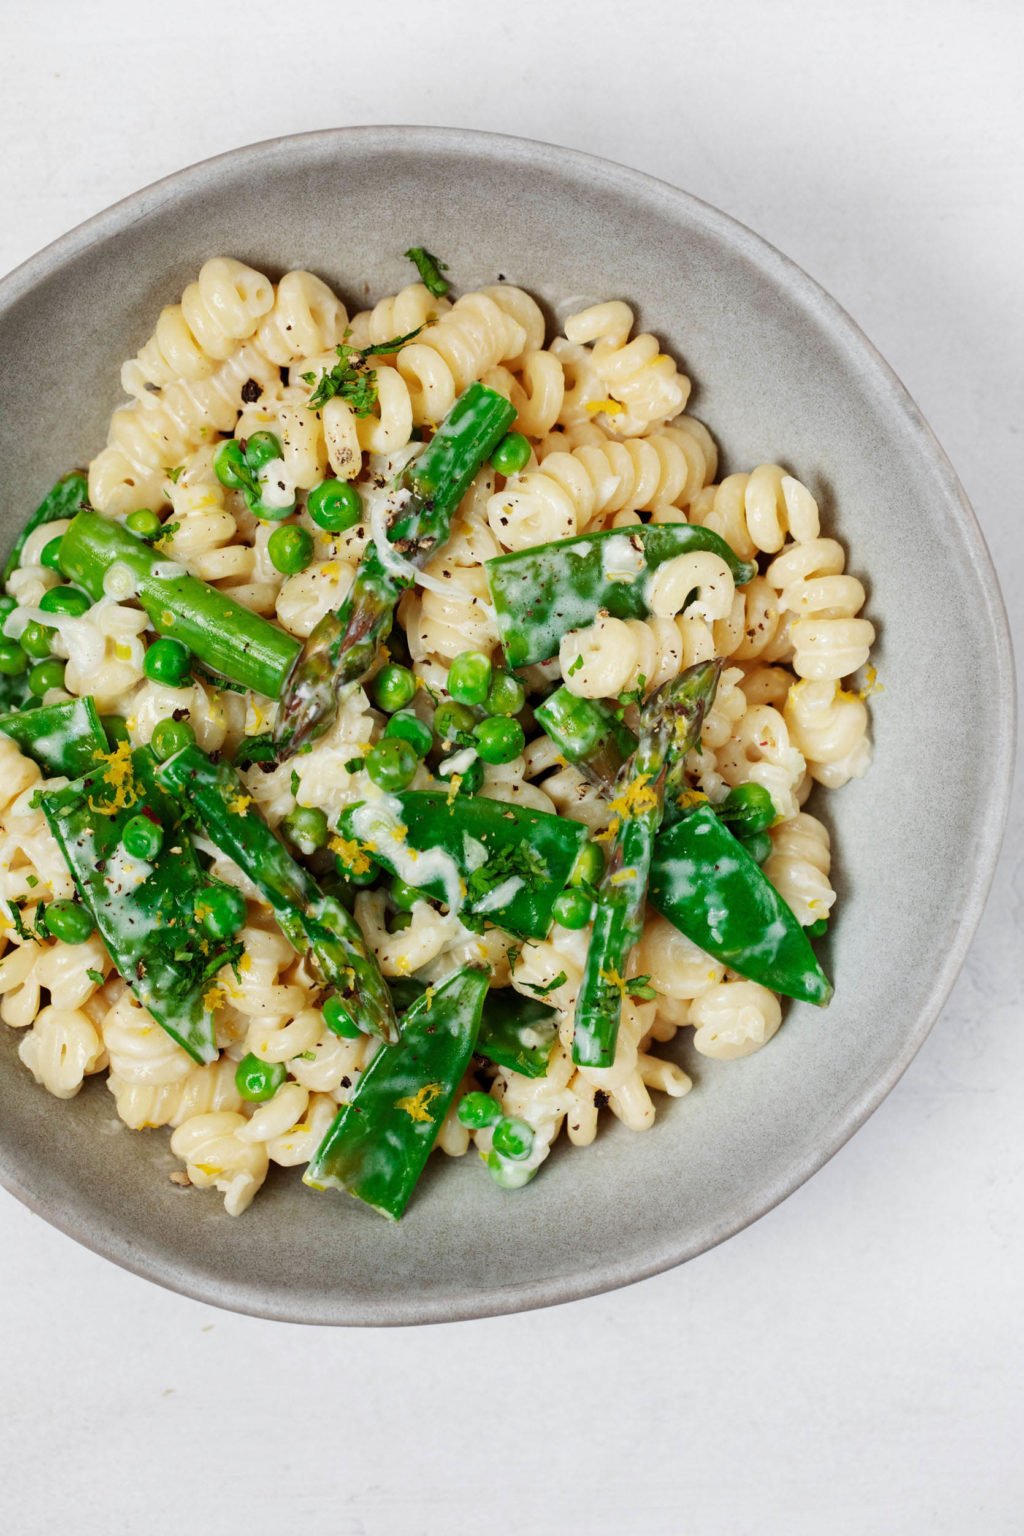 An overhead image of a bowl of vegan spring pasta primavera, which is packed with bright green vegetables.